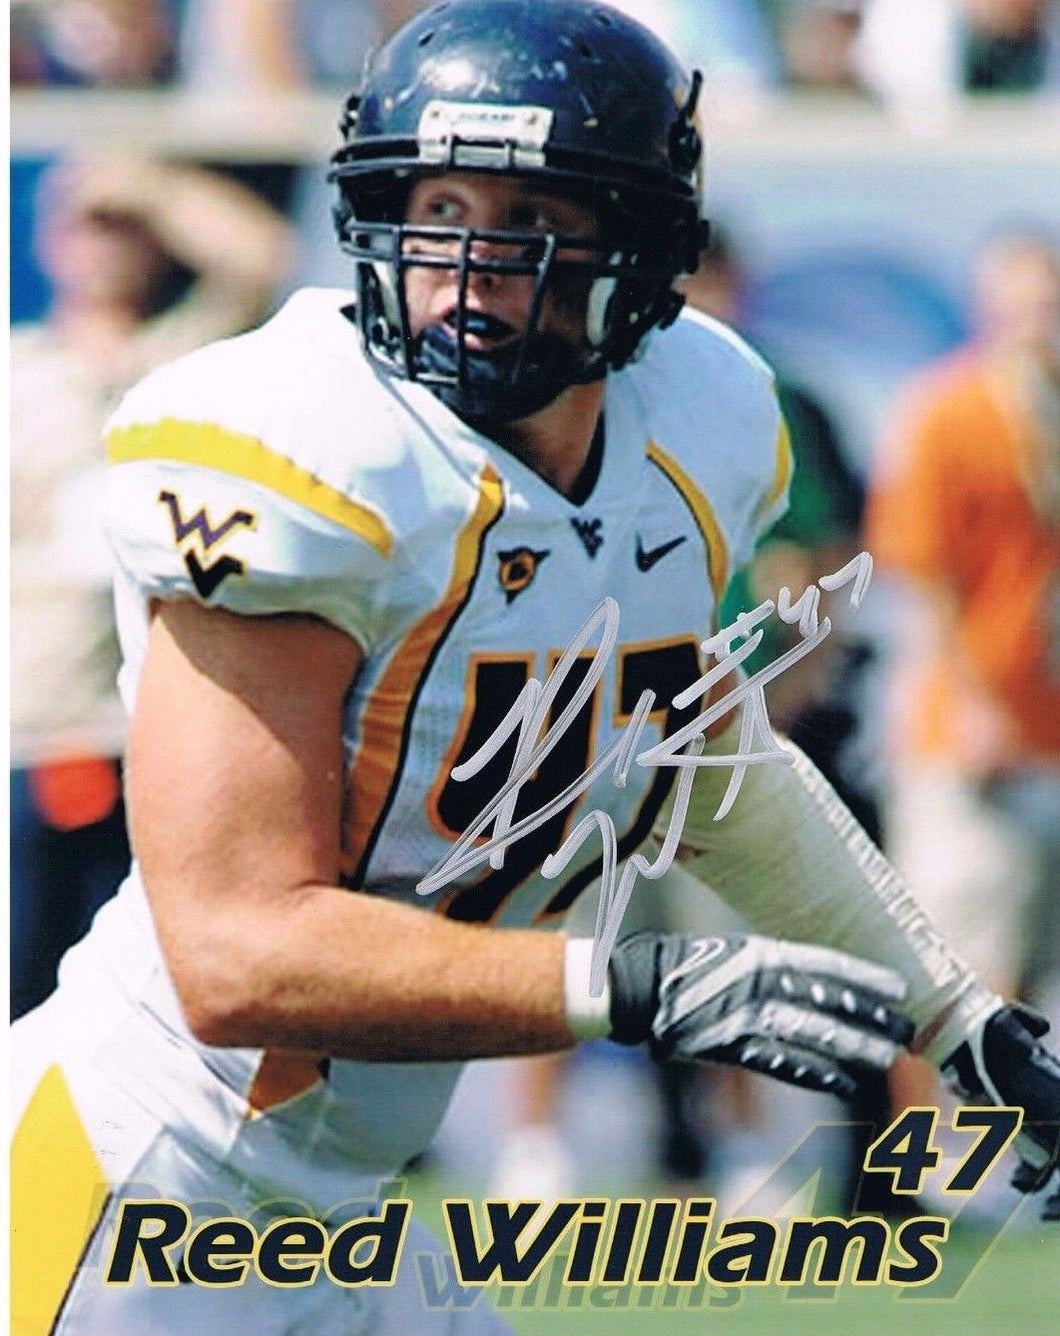 Reed Williams West Virginia Mountaineers Signed 8x10 Photo